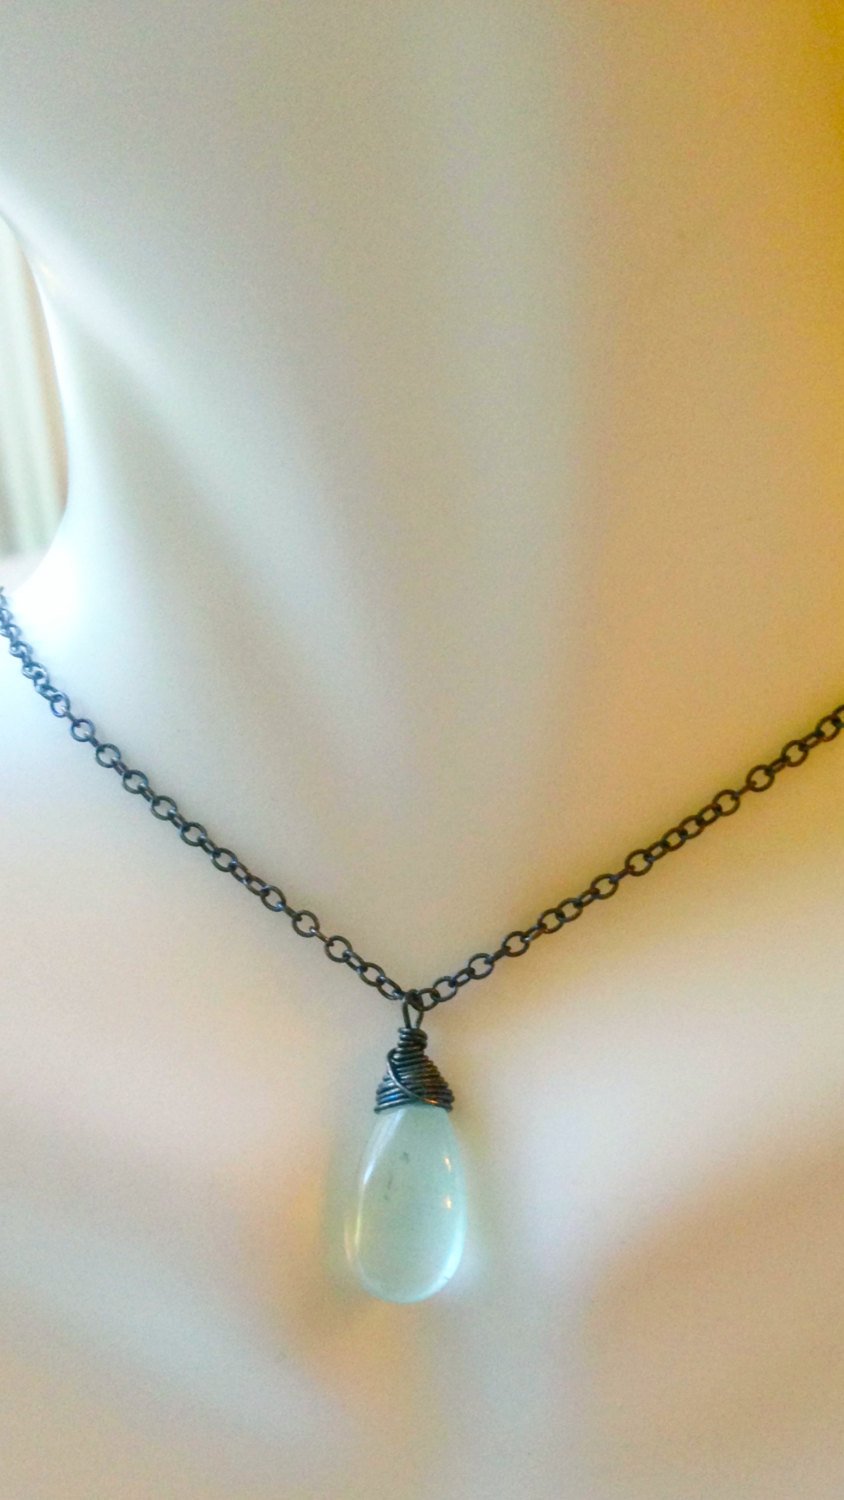 Aquamarine Gemstone Pendant Necklace for Positive Communication and Expression March Birthstone